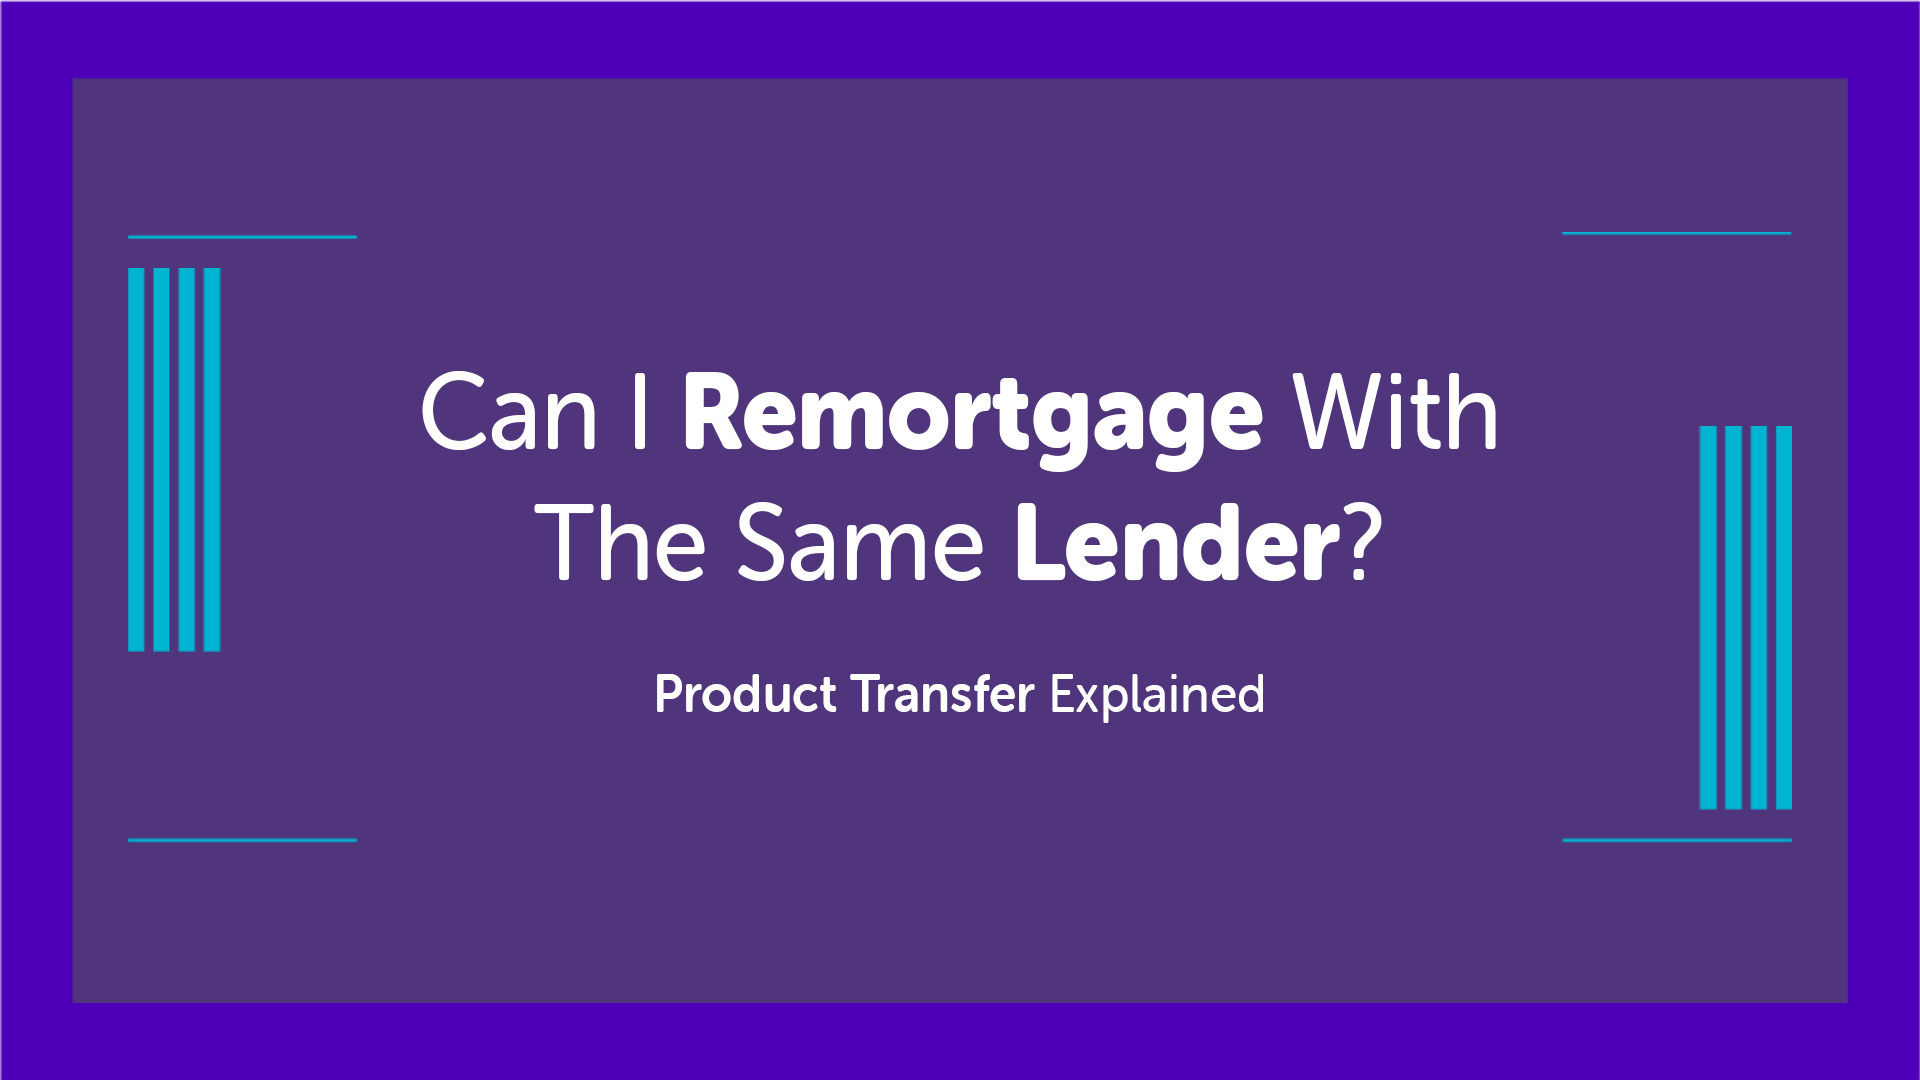 Can I remortgage with the same lender? Product Transfer Explained